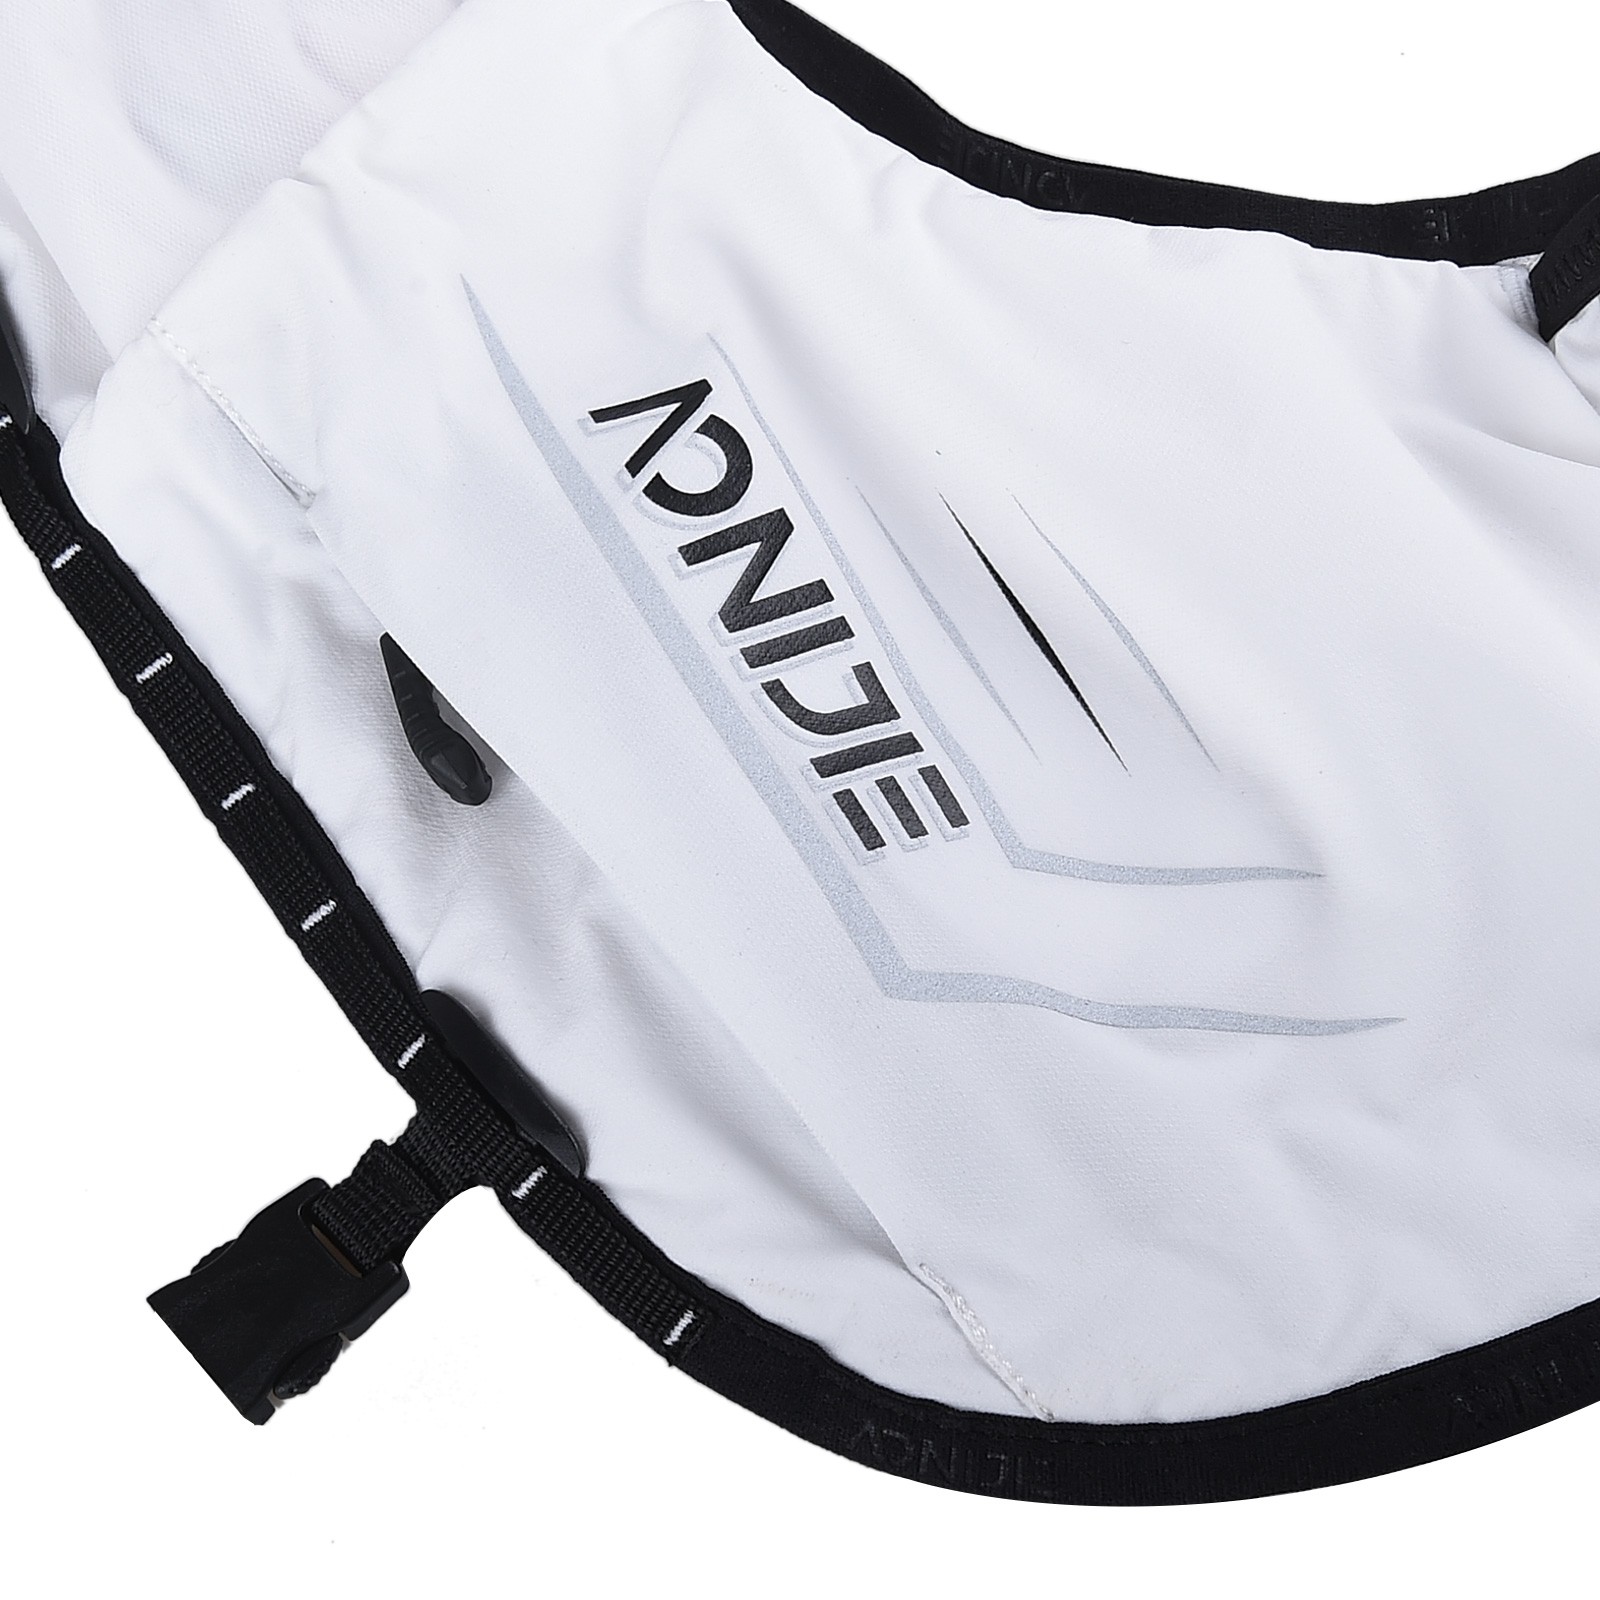 AONIJIE C9108 White Outdoor Running Backpack Pack with Water Bladder Lightweight Hydration Rucksack Bag Hiking Marathon Cycling